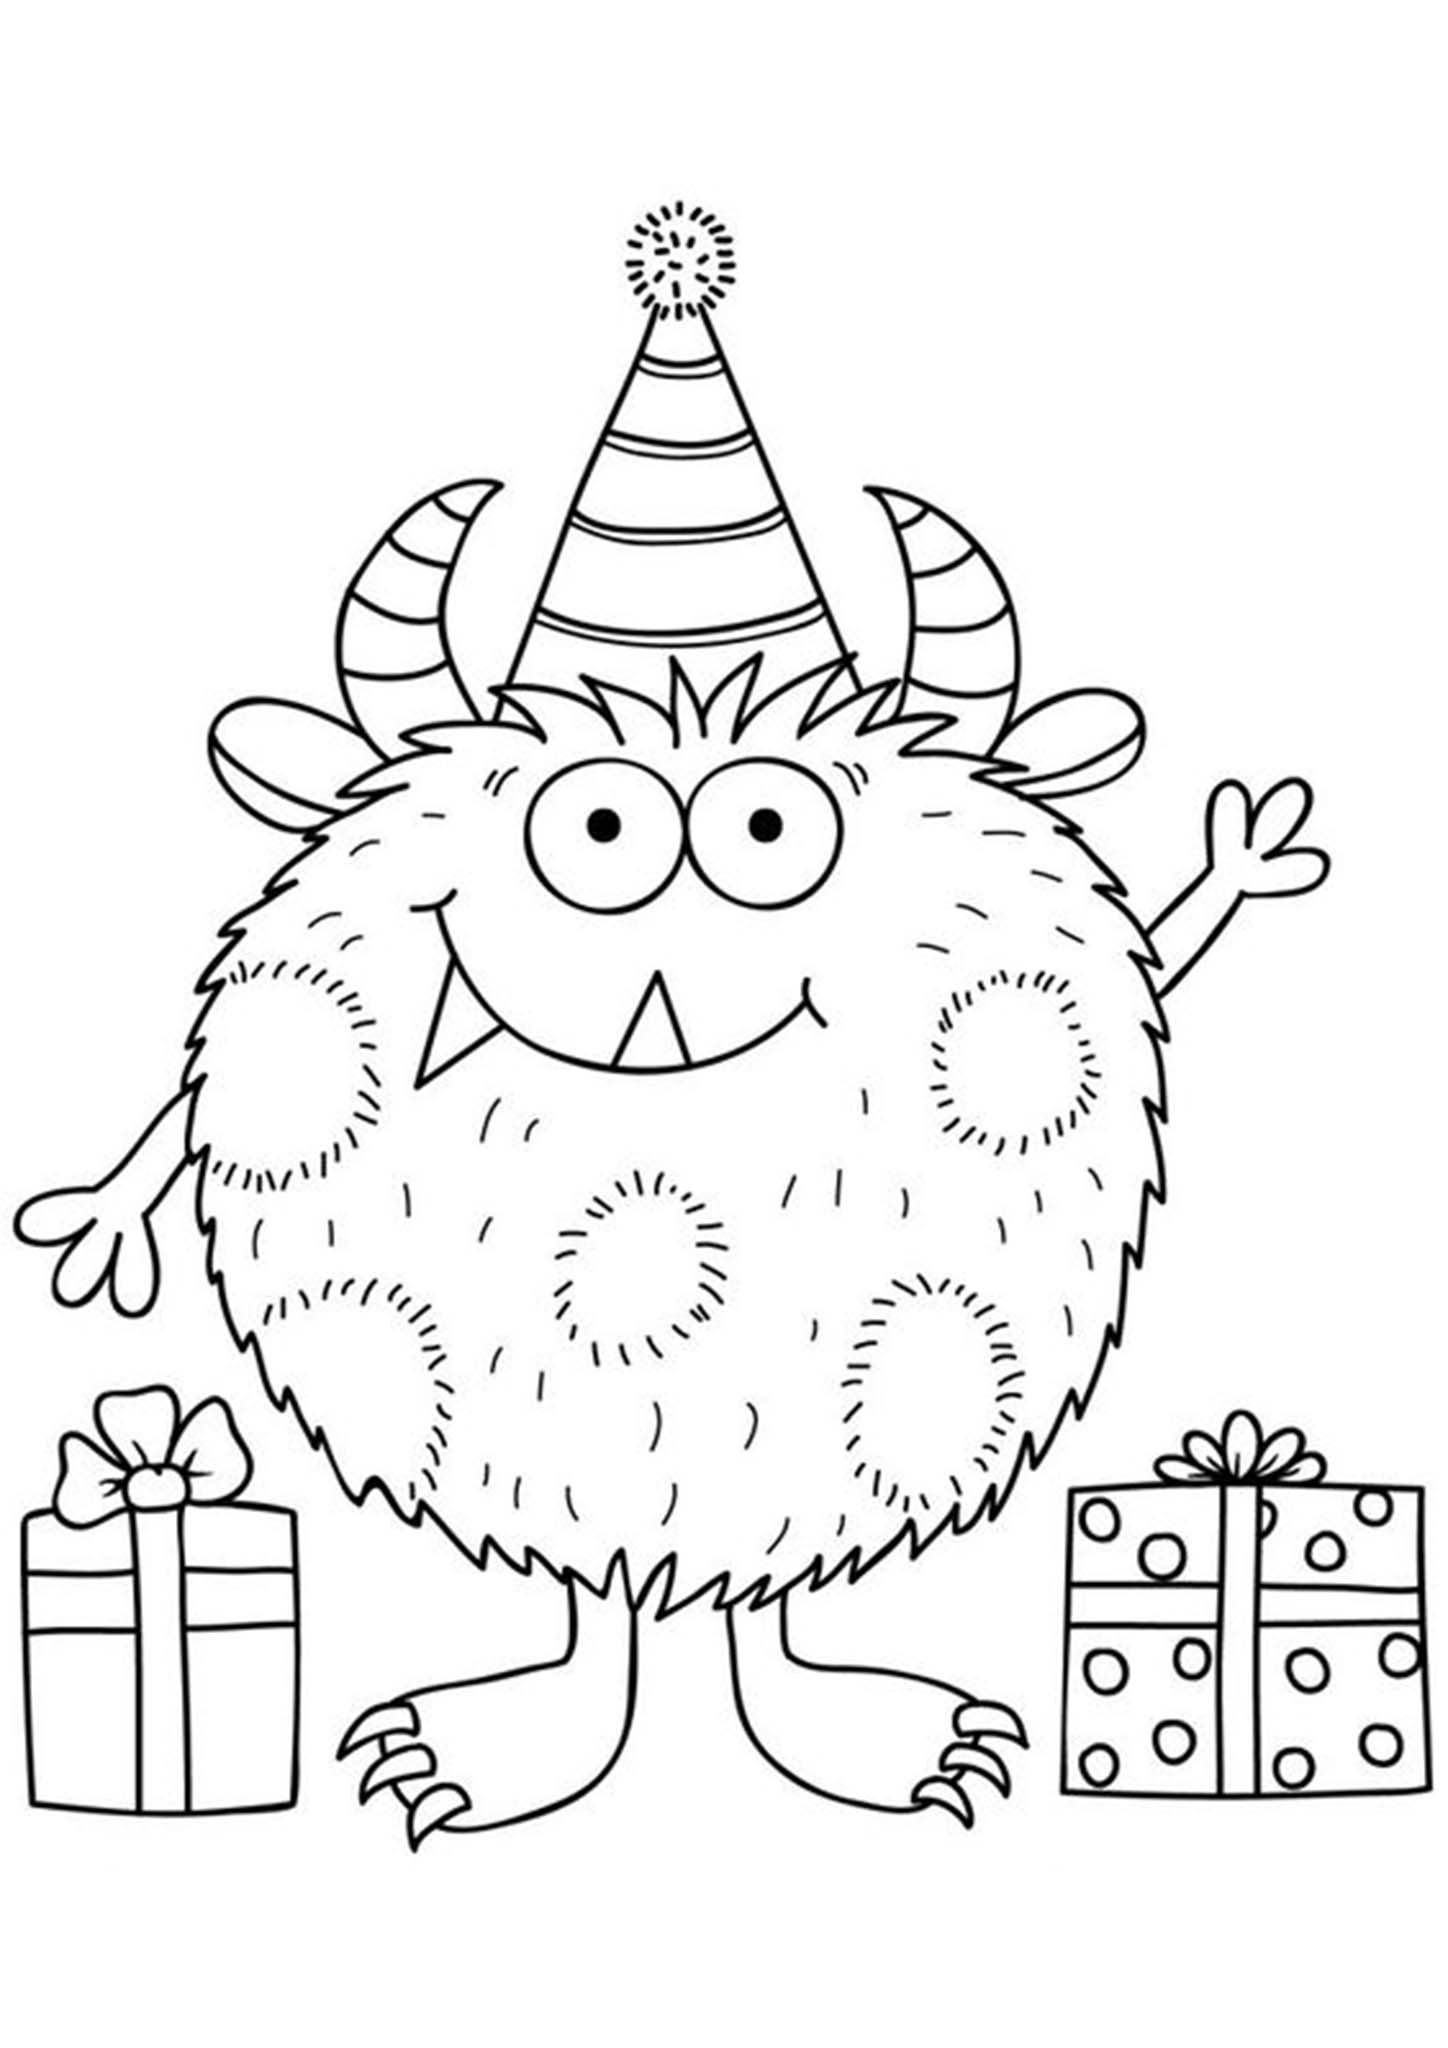 Free easy to print monster coloring pages monster coloring pages birthday coloring pages monster quilt